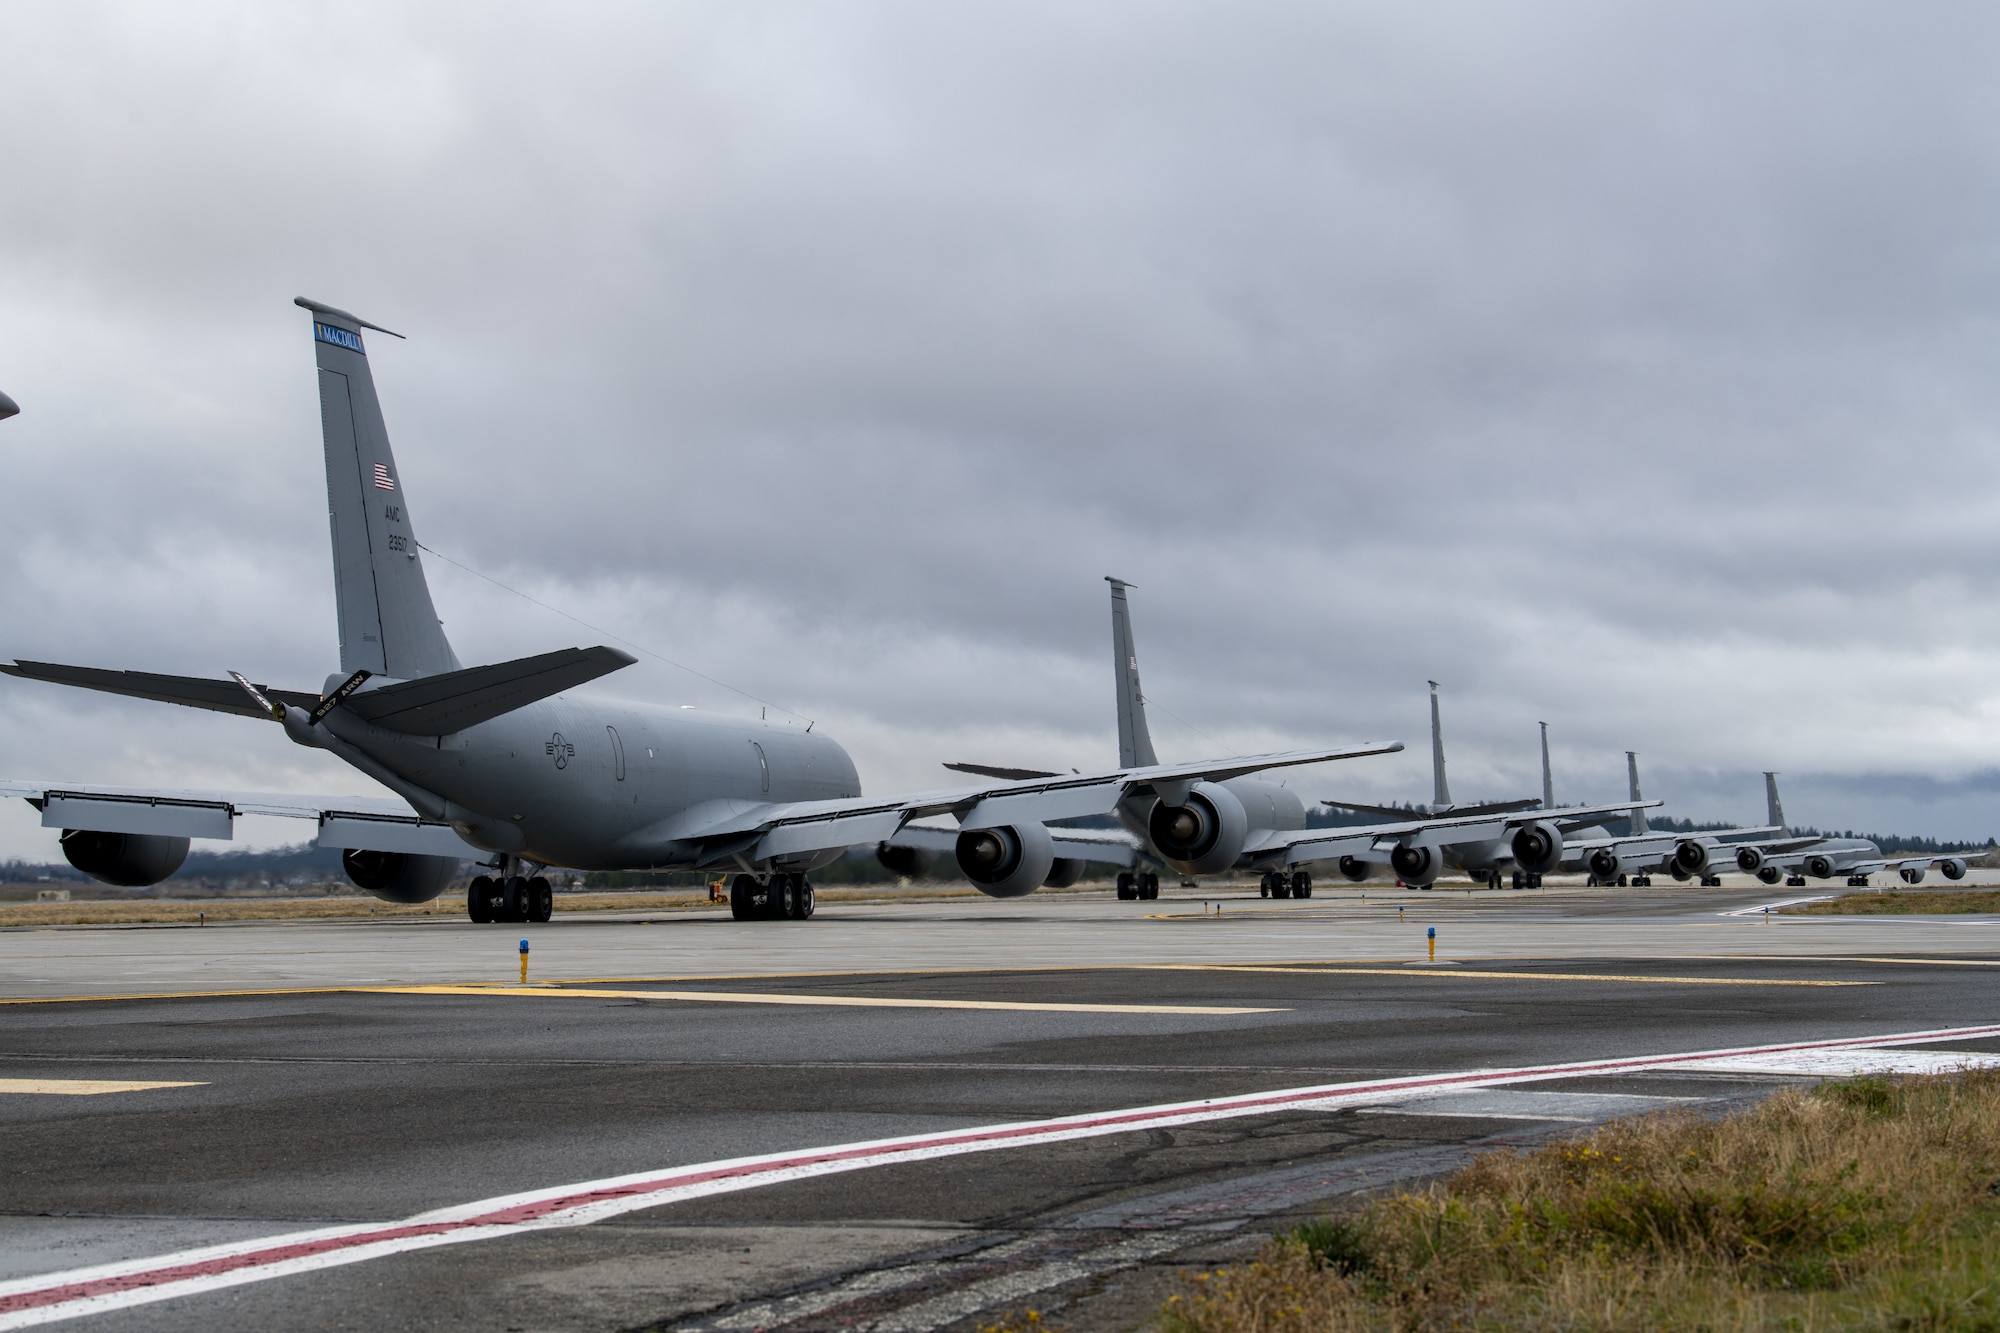 Multiple KC-135 Stratotankers taxi during exercise Global Thunder 22 at Fairchild Air Force Base, Washington, Nov. 6, 2021. Global Thunder is an annual command and control exercise designed to train U.S. Strategic Command forces and assess joint operational readiness. (U.S. Air Force photo by Staff Sgt. Lawrence Sena)